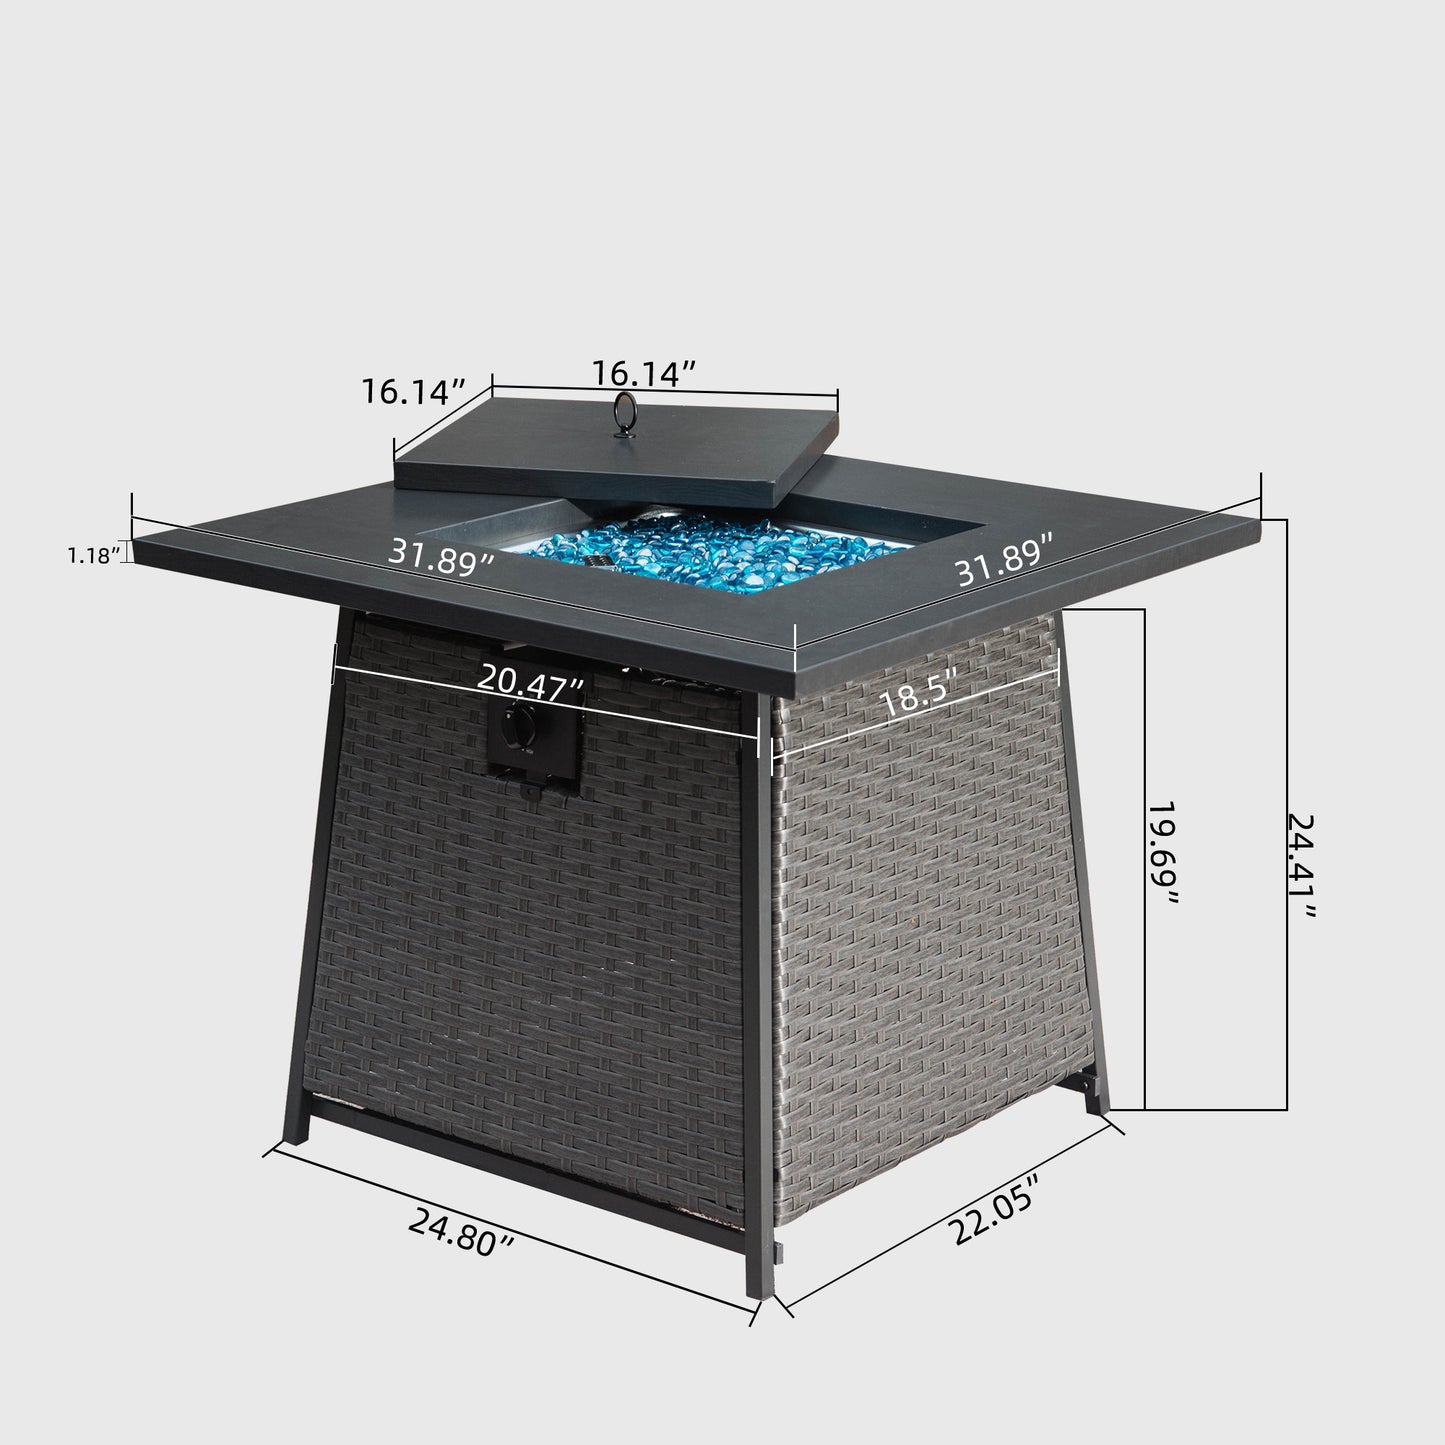 32 Inch Propane Fire Pits Table with Blue Glass Ball,50,000 BTU Outdoor Wicker Fire Table with ETL-Certified,2-in-1 Square Steel Gas Firepits (Dark Gray)